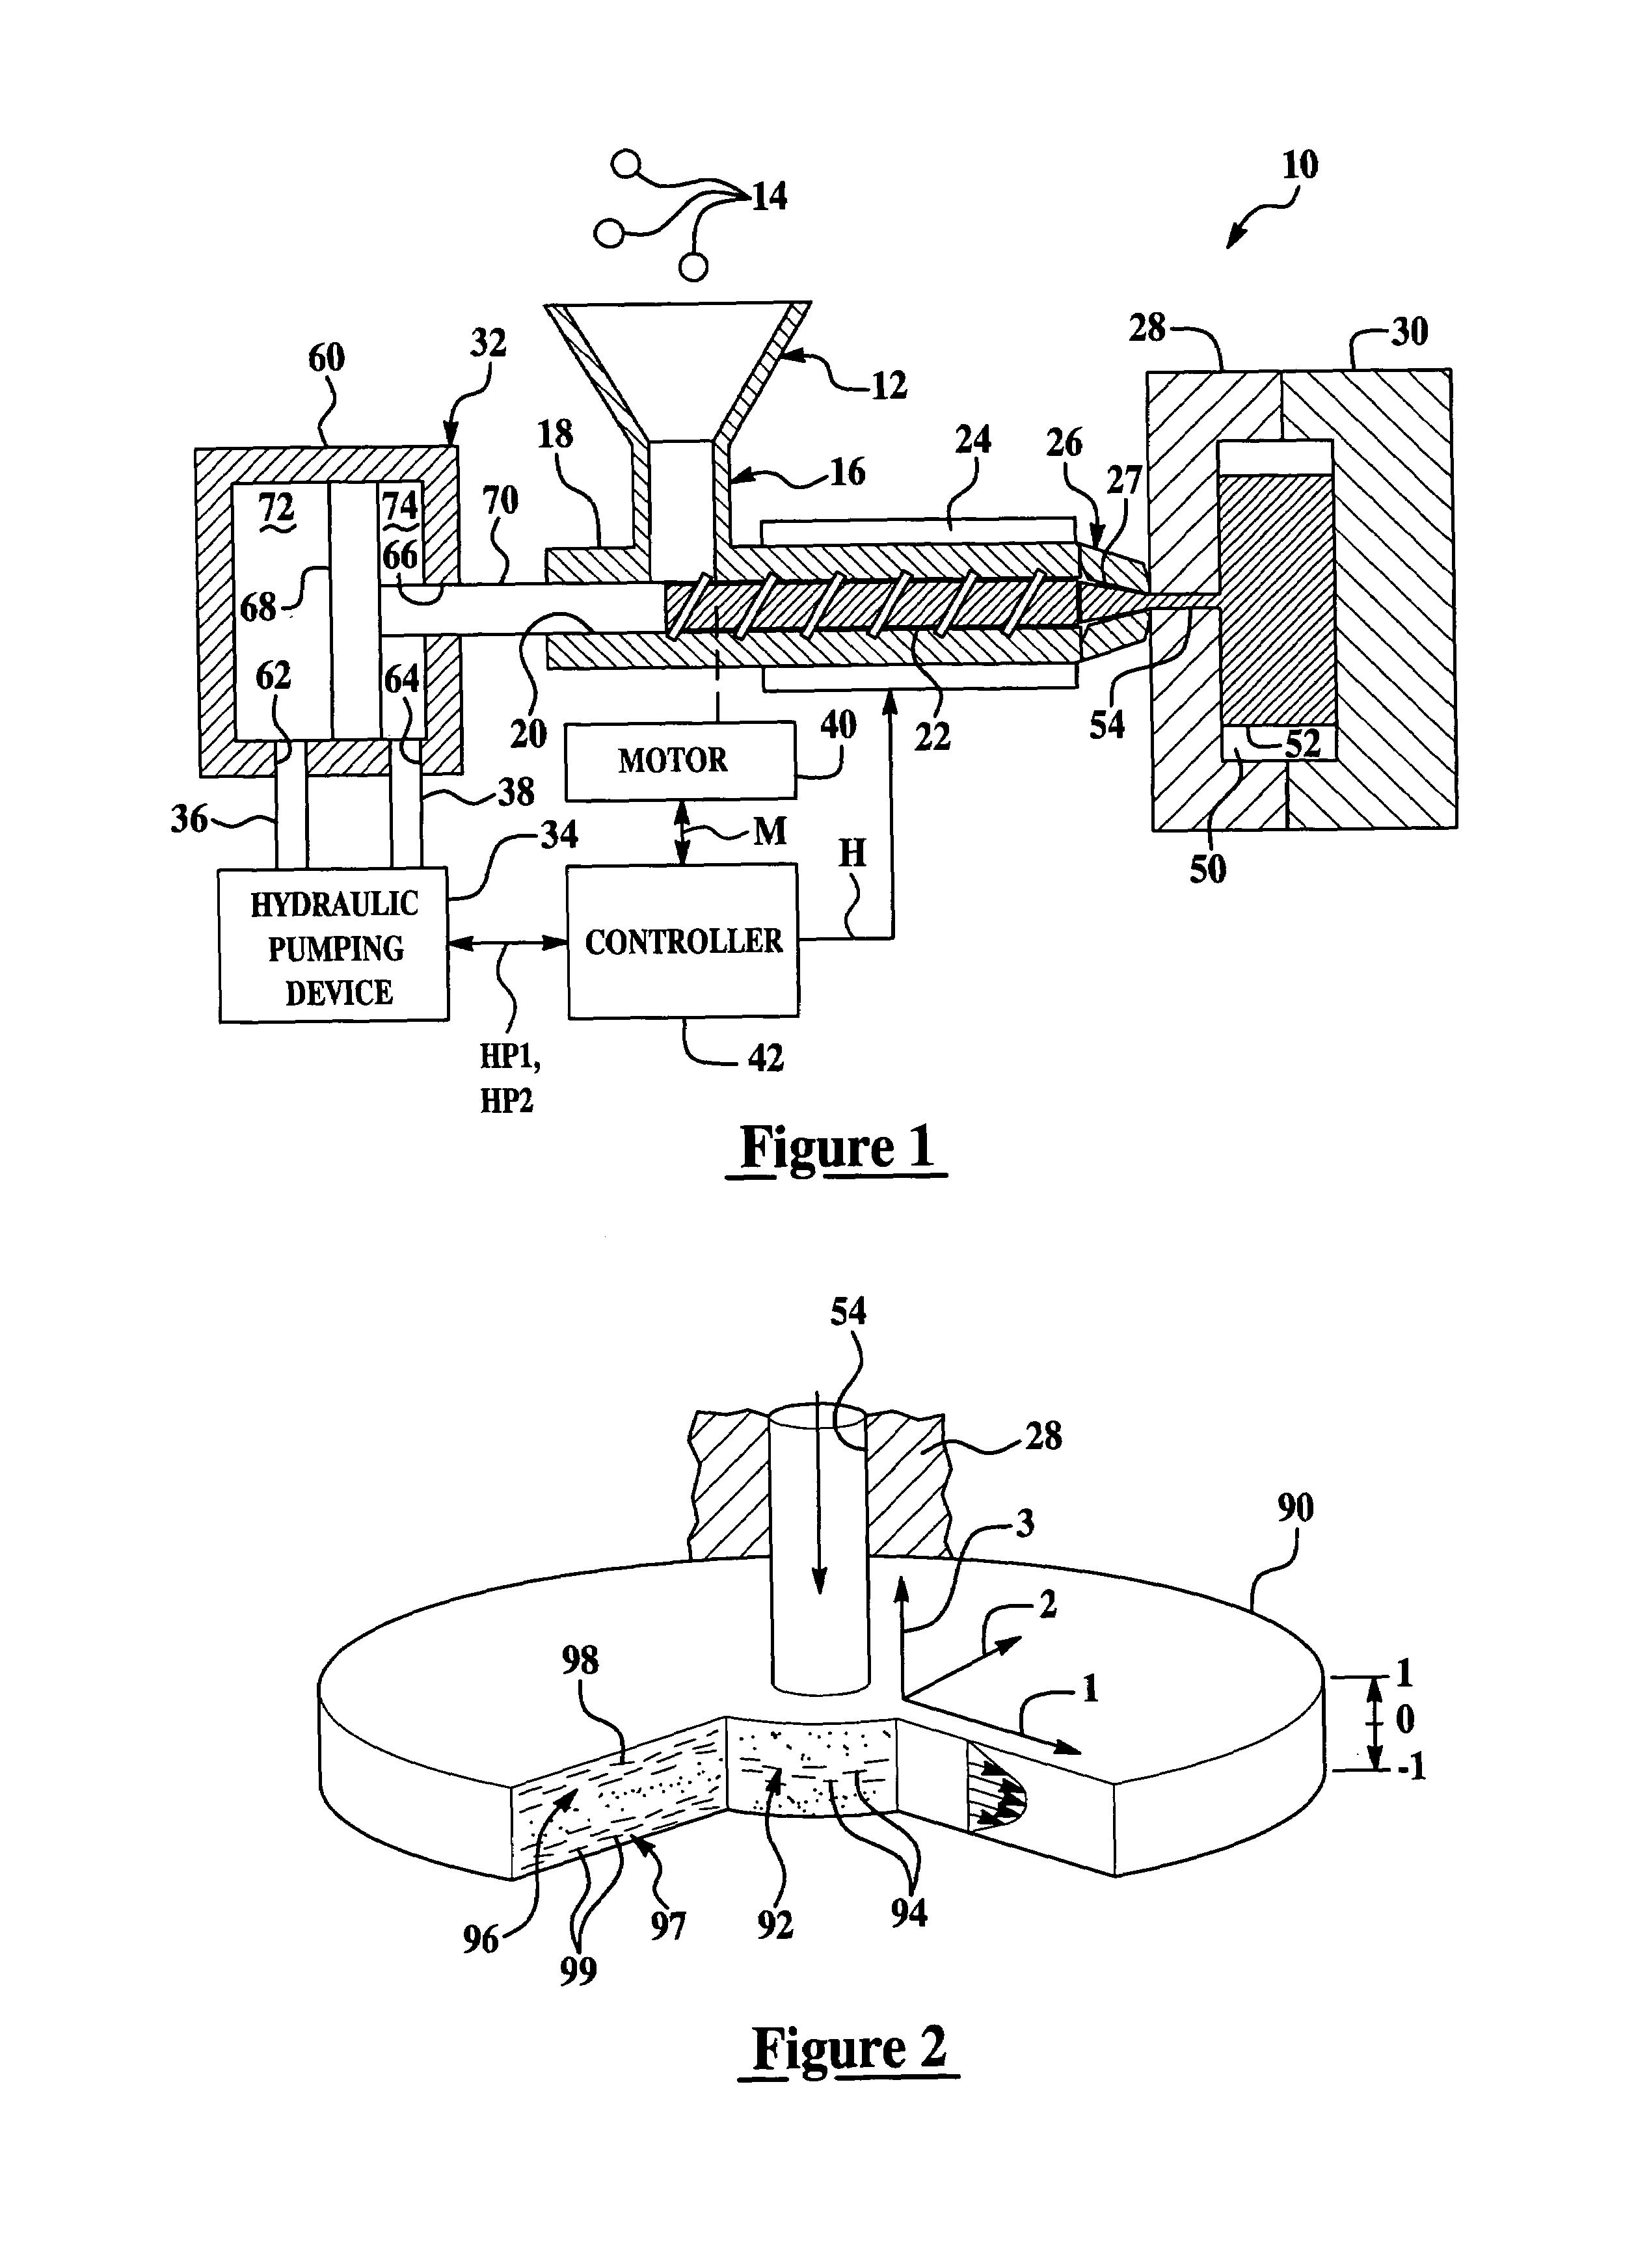 Method and article of manufacture for determining a rate of change of orientation of a plurality of fibers disposed in a fluid